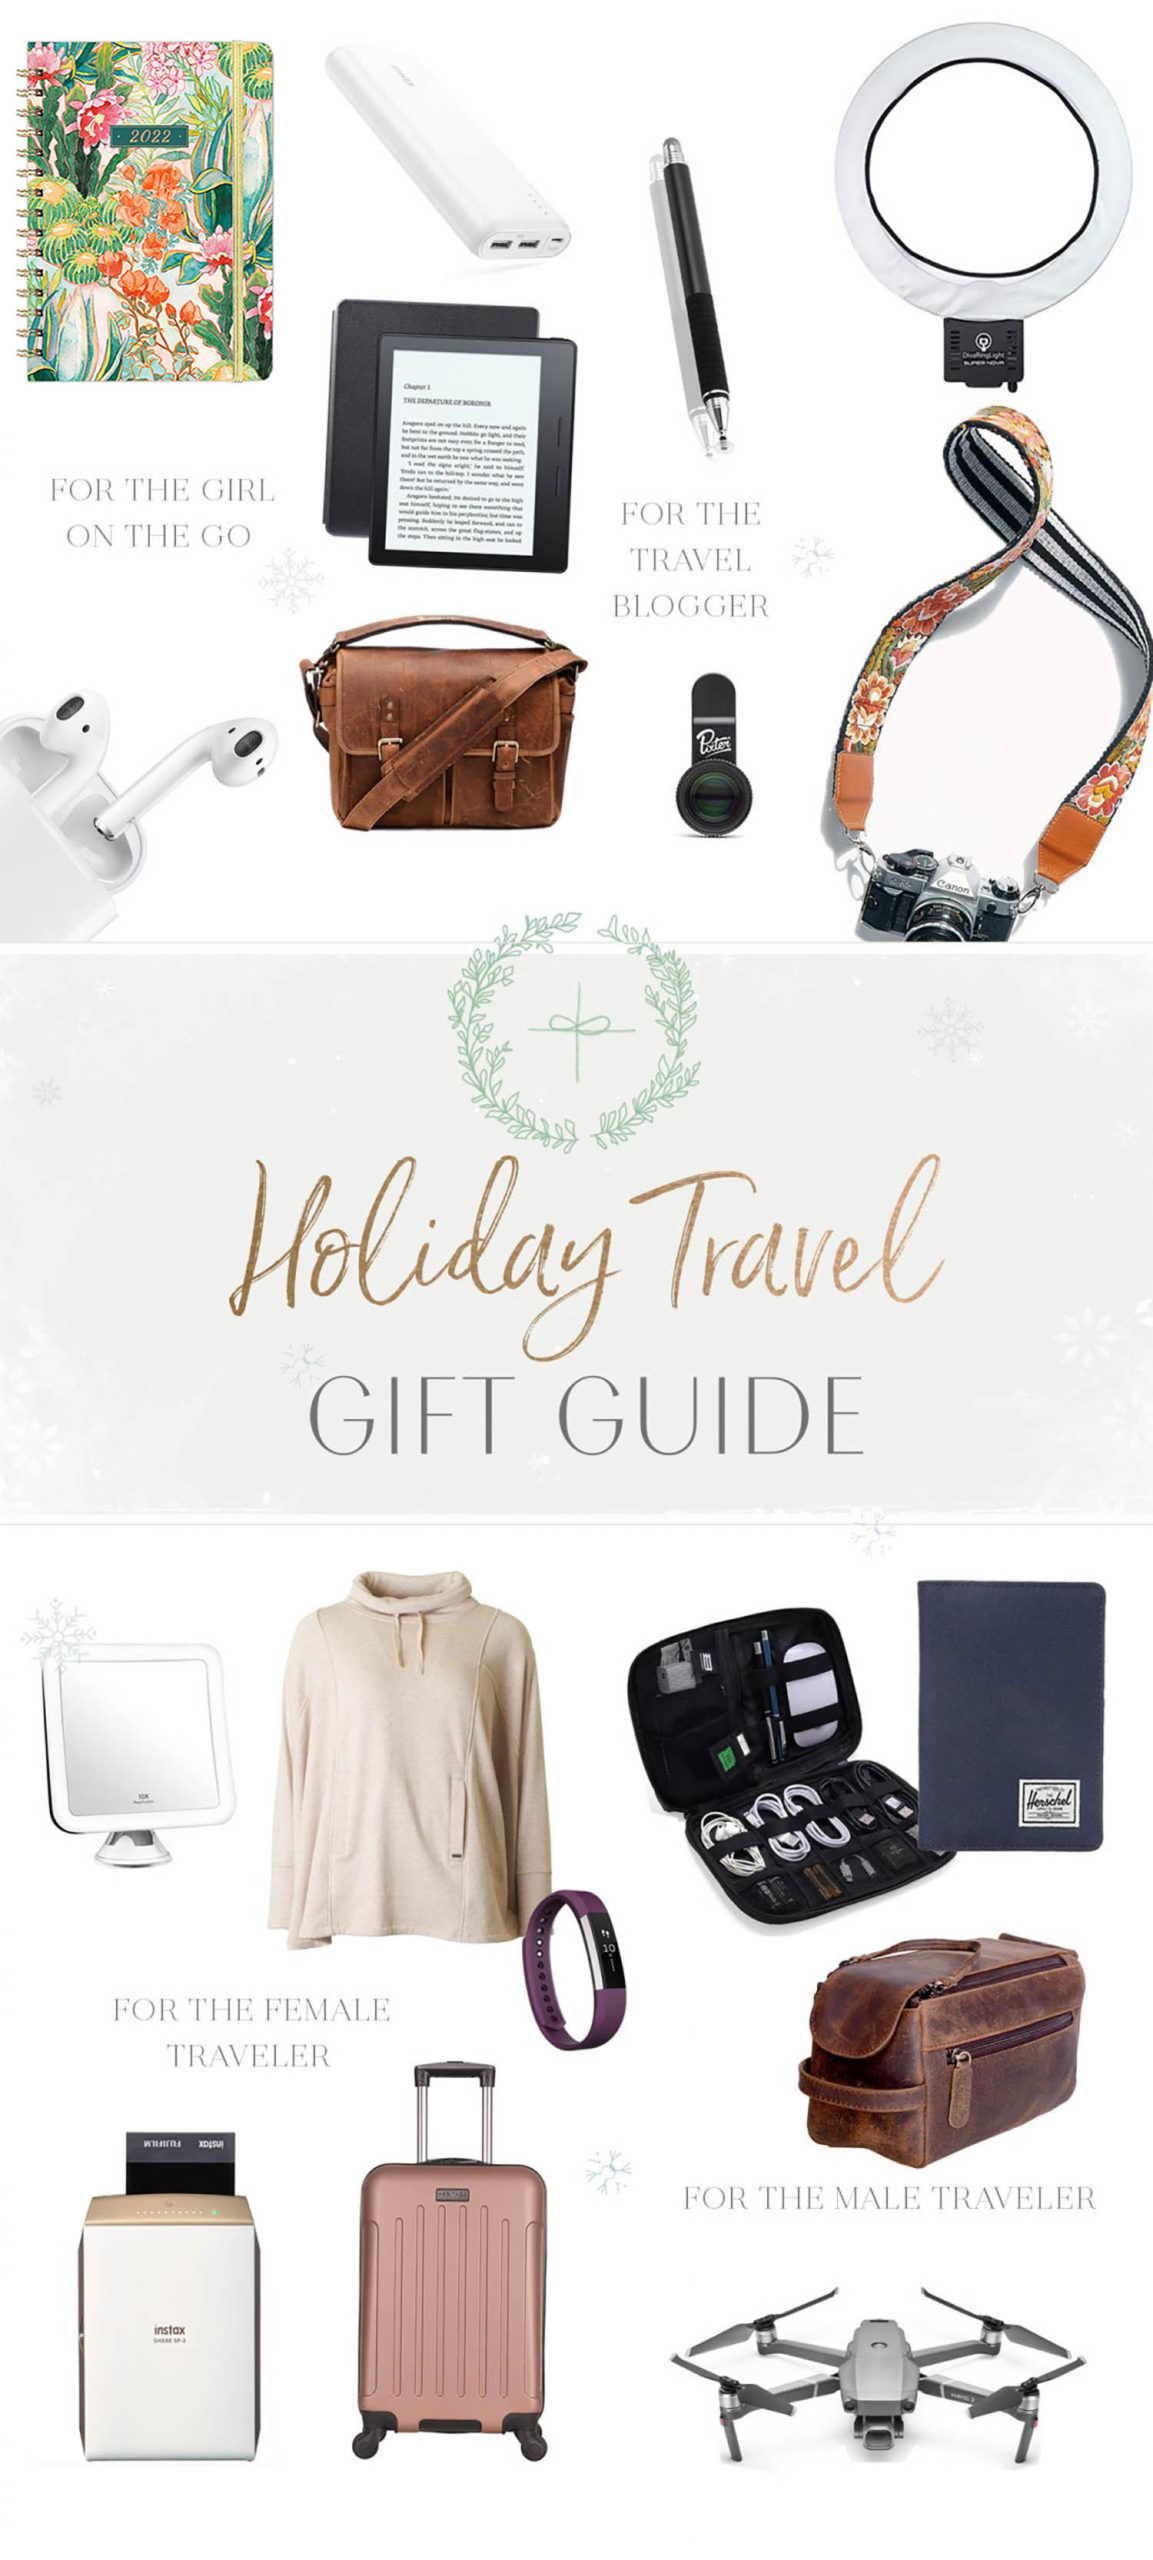 20 Unique Travel Gifts For All Tastes And Budgets - The Travel Expert